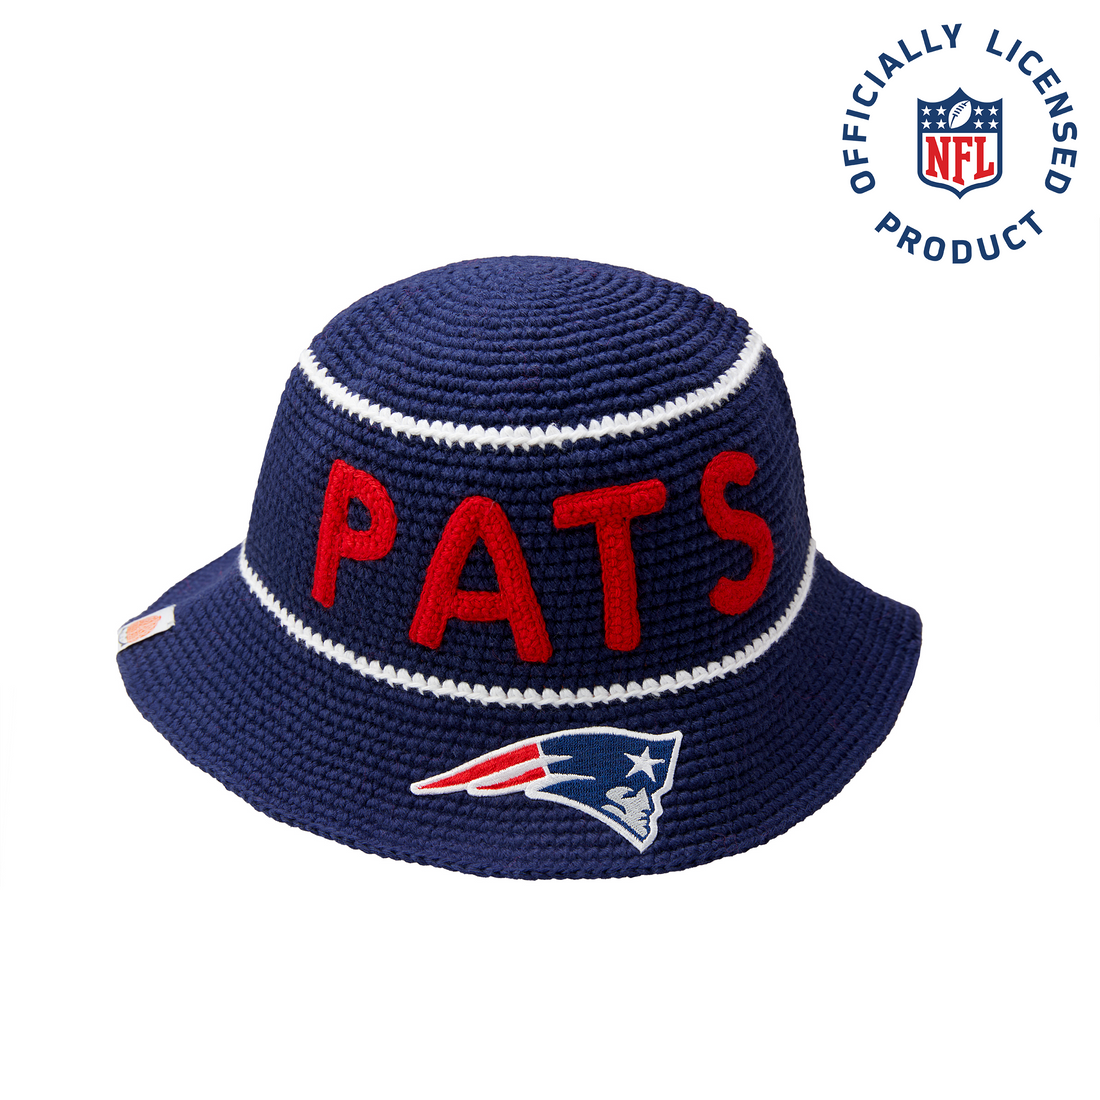 The Pats NFL Bucket Hat